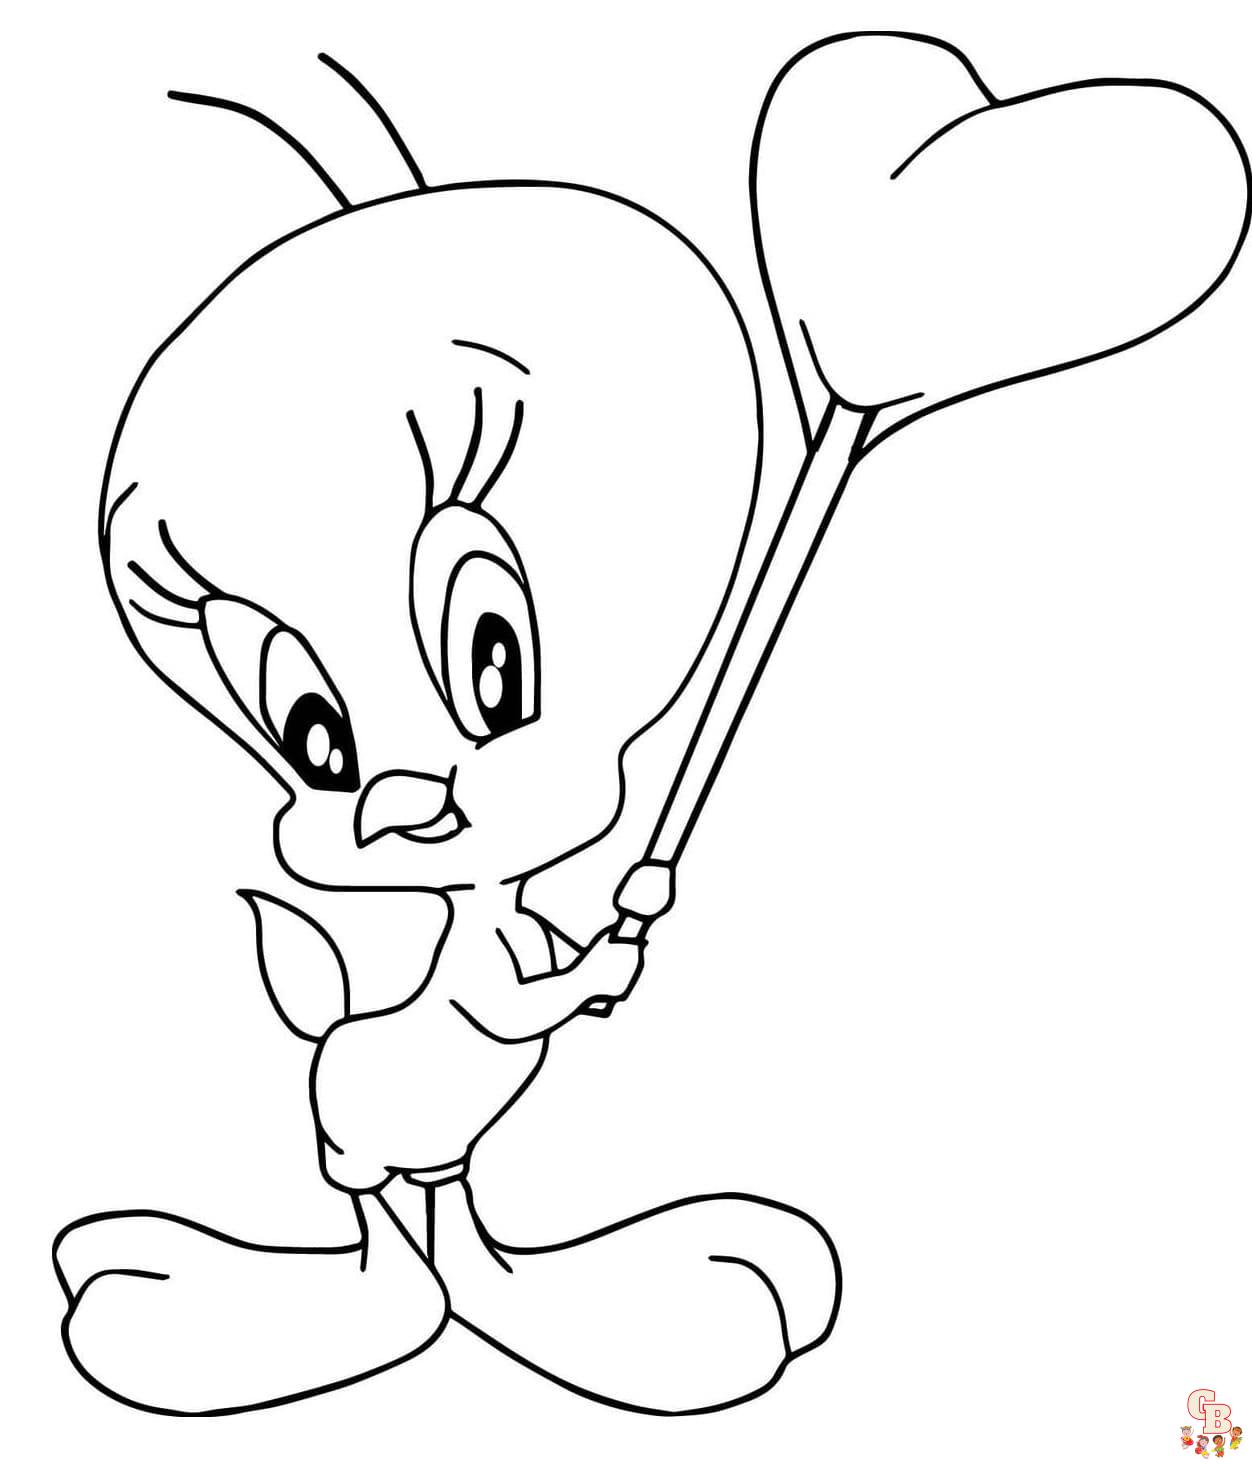 Tweety coloring pages free